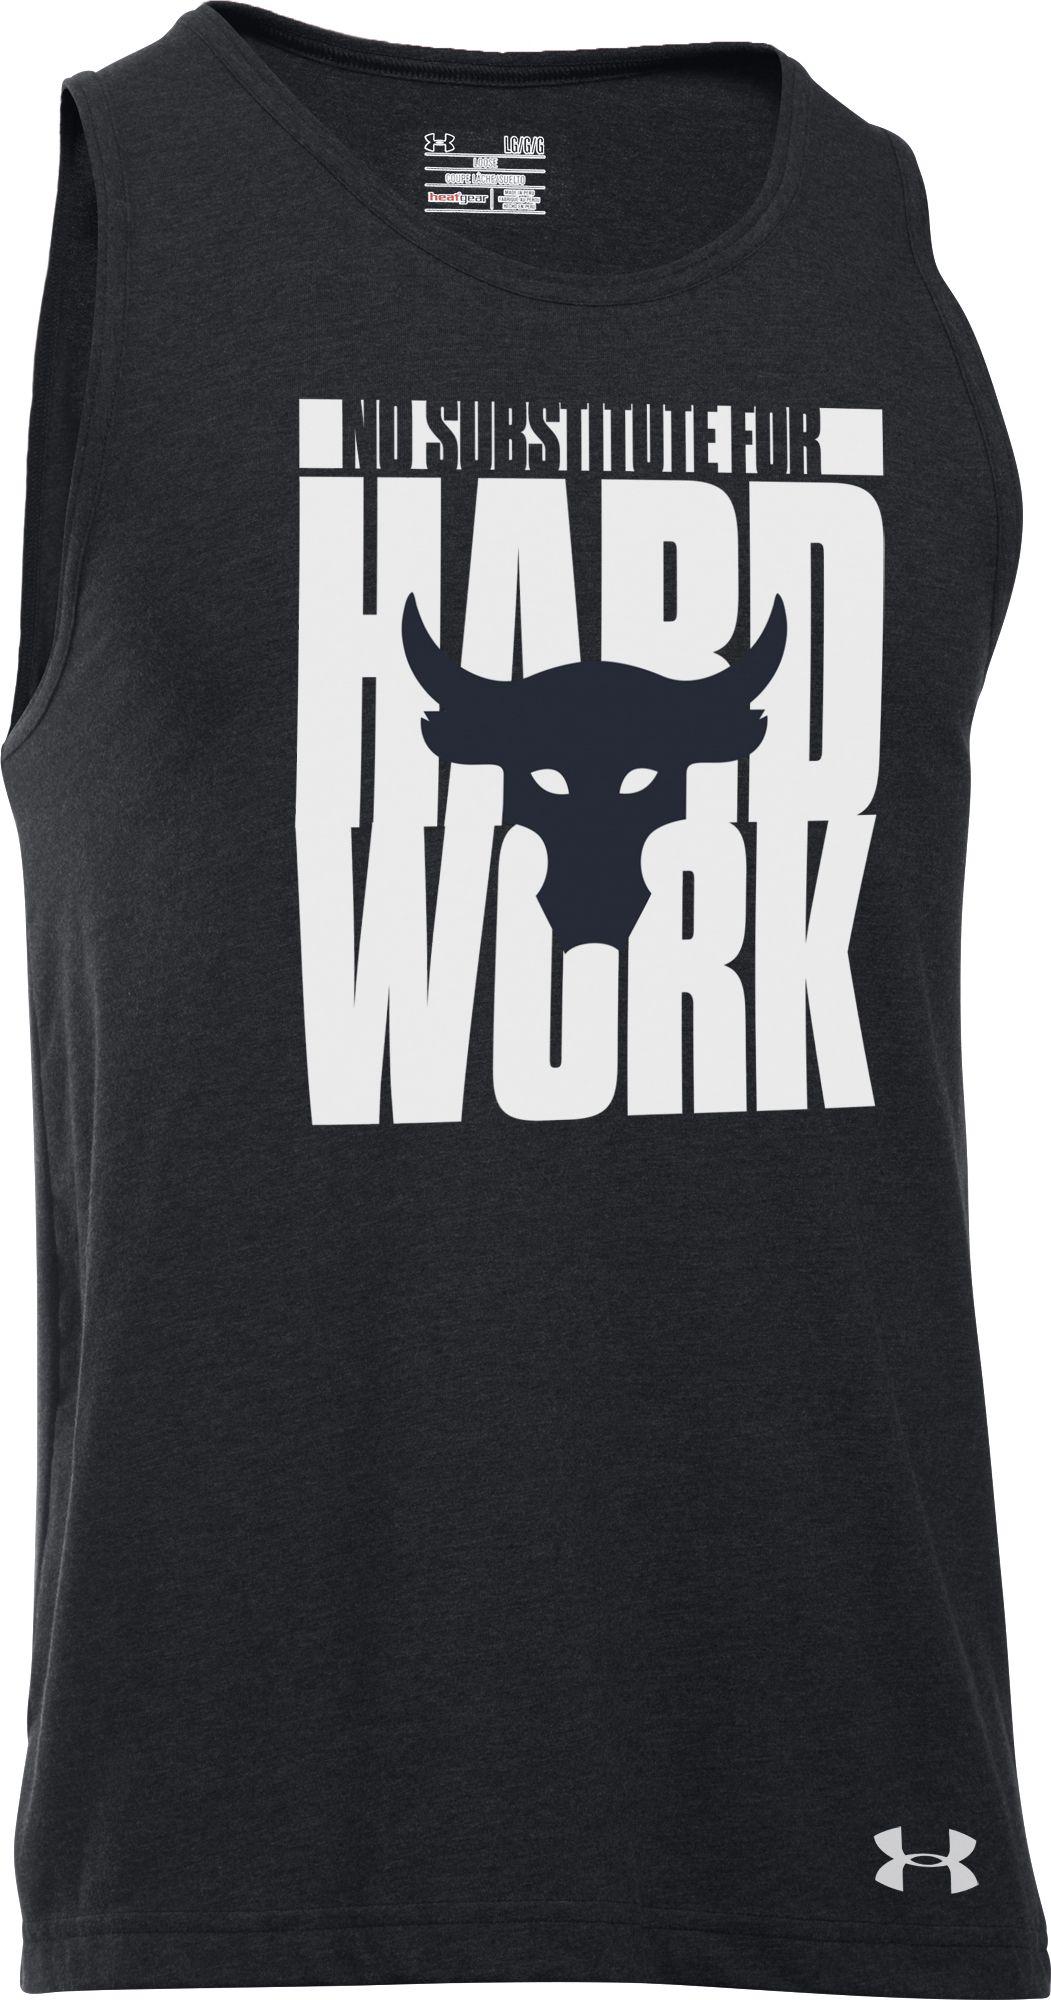 Download Under Armour Project Rock Hard Work Graphic Sleeveless ...